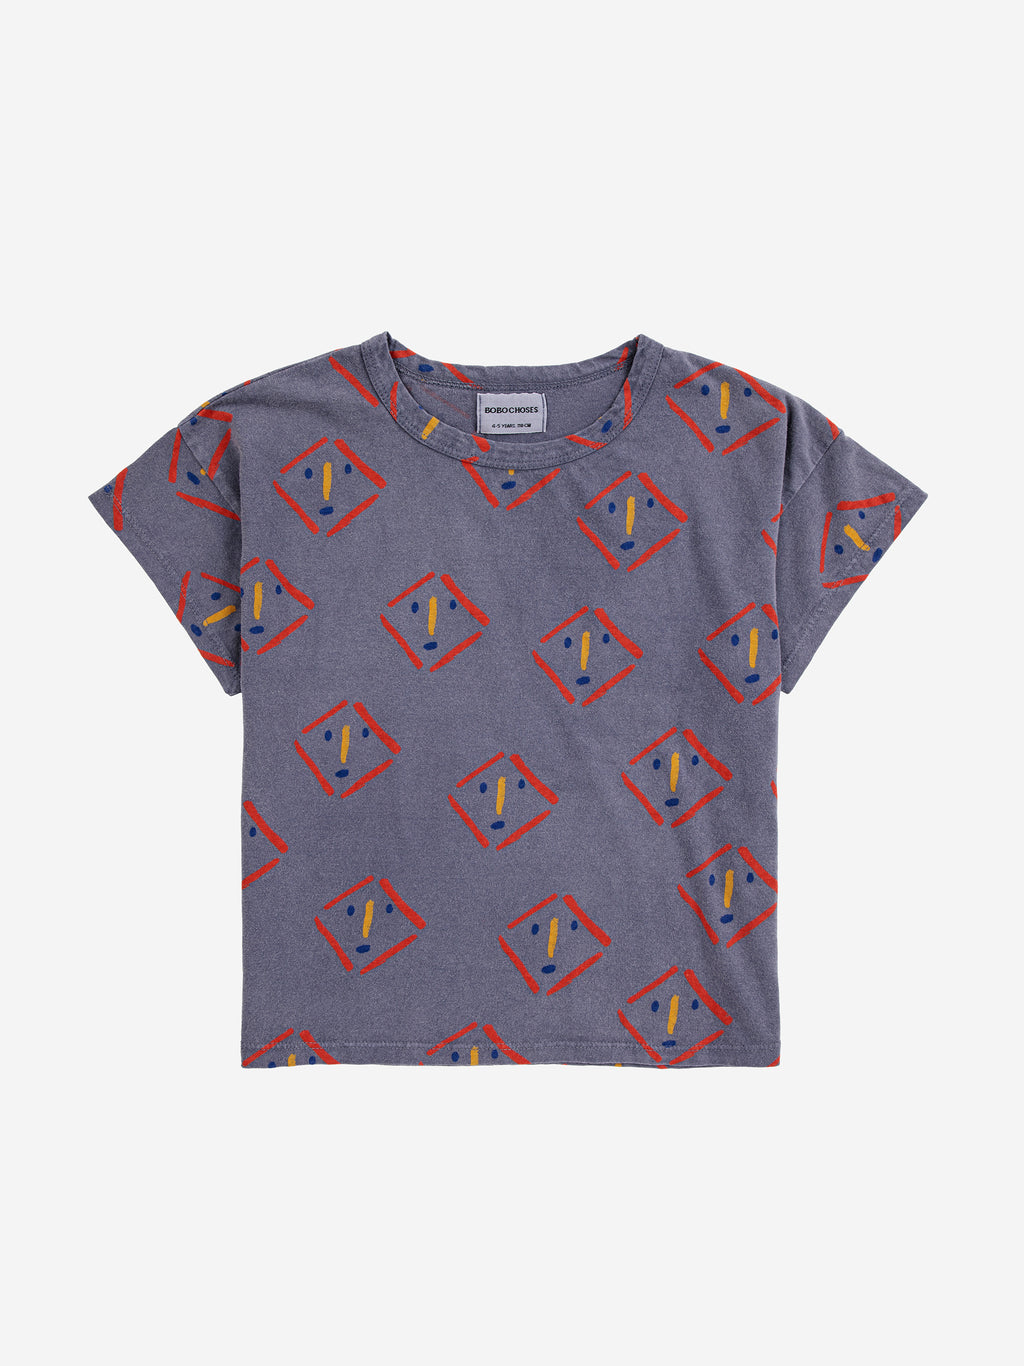 Bobo Choses Masks All Over T-shirt - Prussian Blue